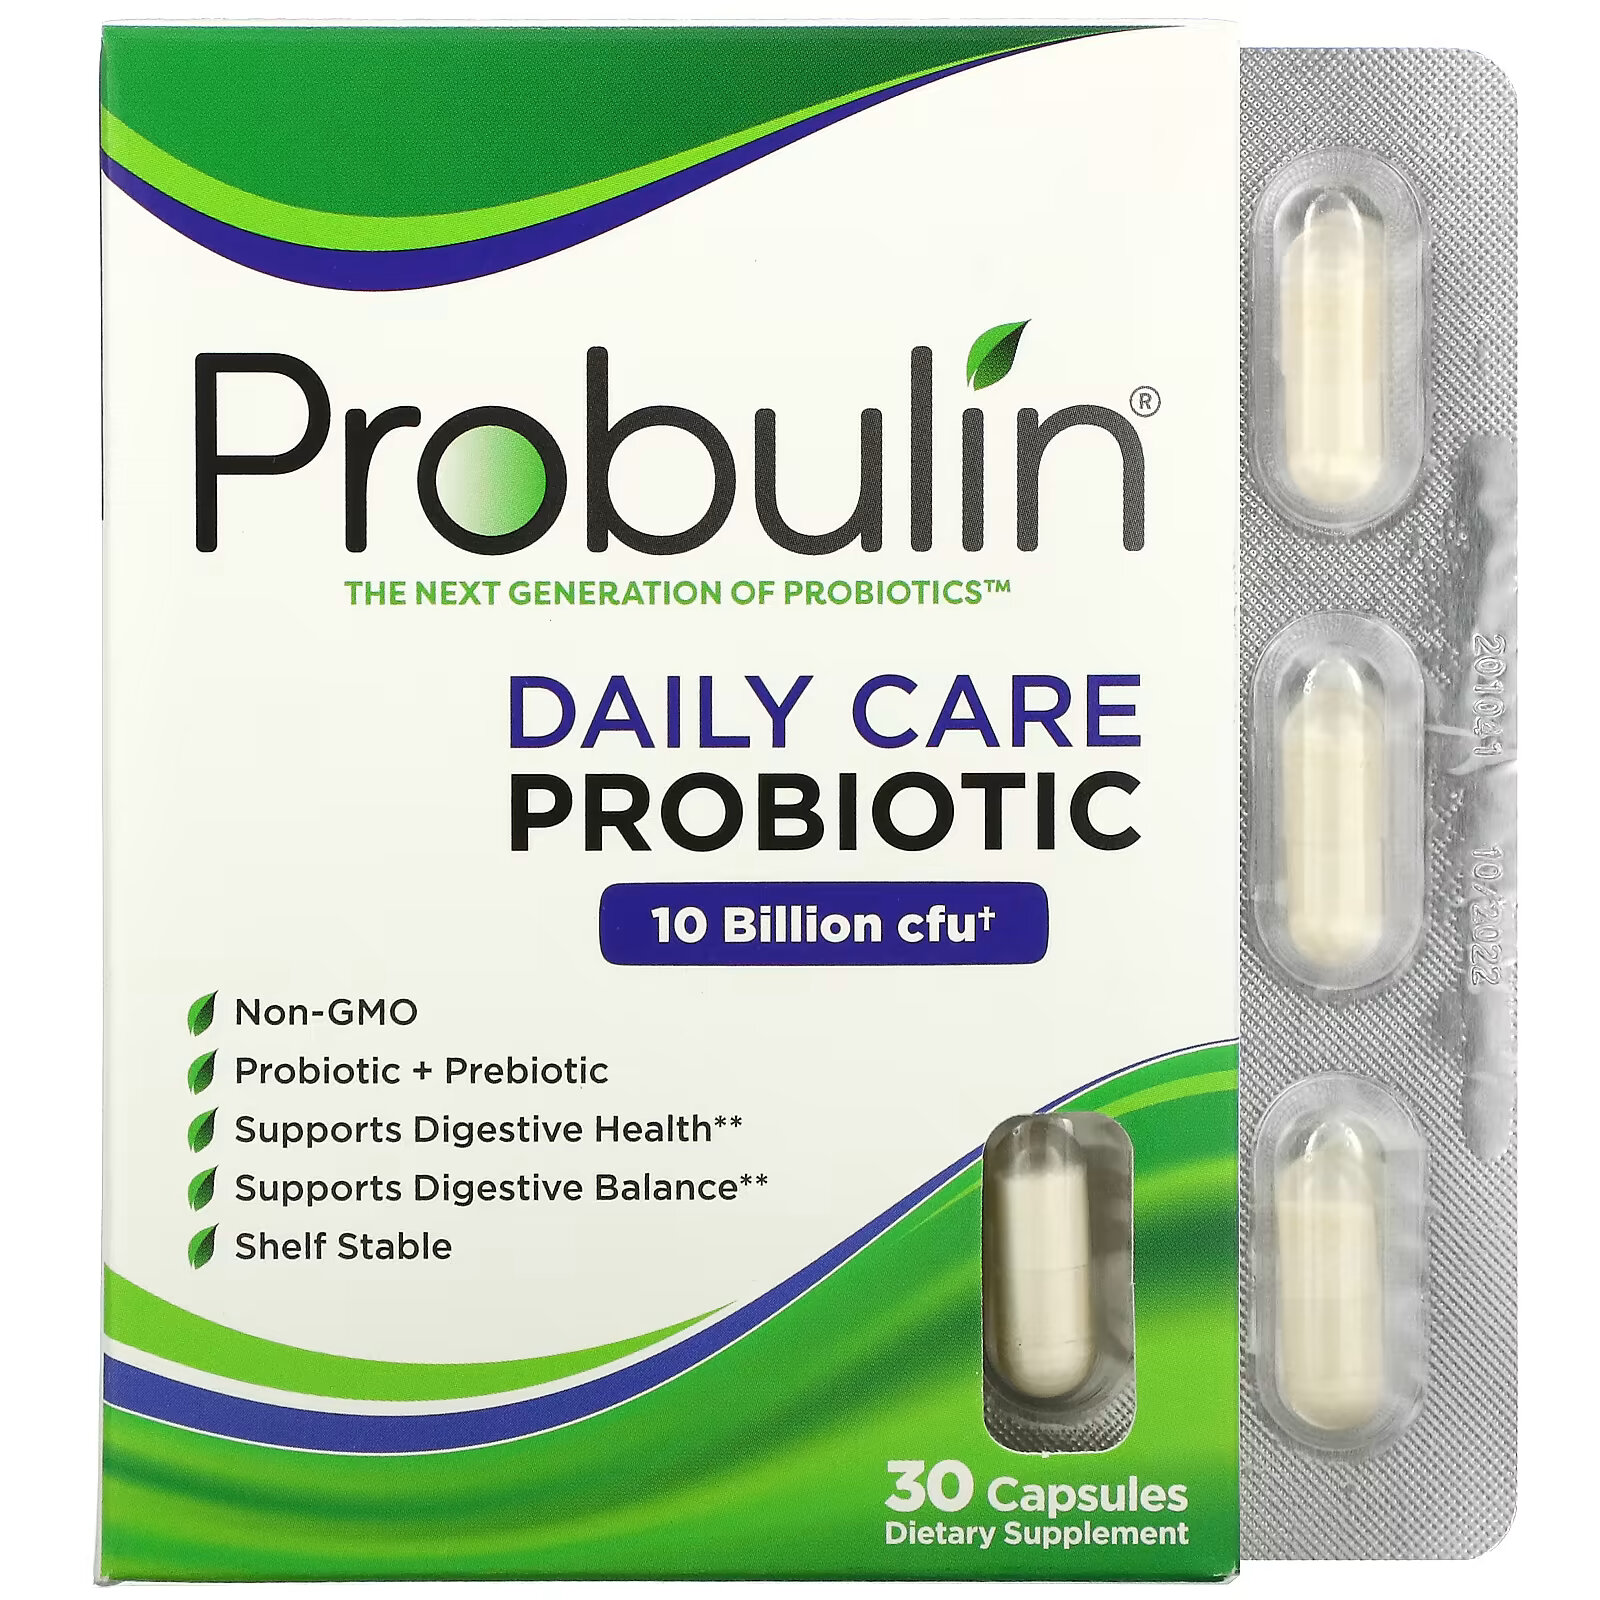 Probulin, Daily Care, пробиотик, 10 млрд КОЕ, 30 капсул trace minerals пробиотик 55 млрд кое 30 капсул